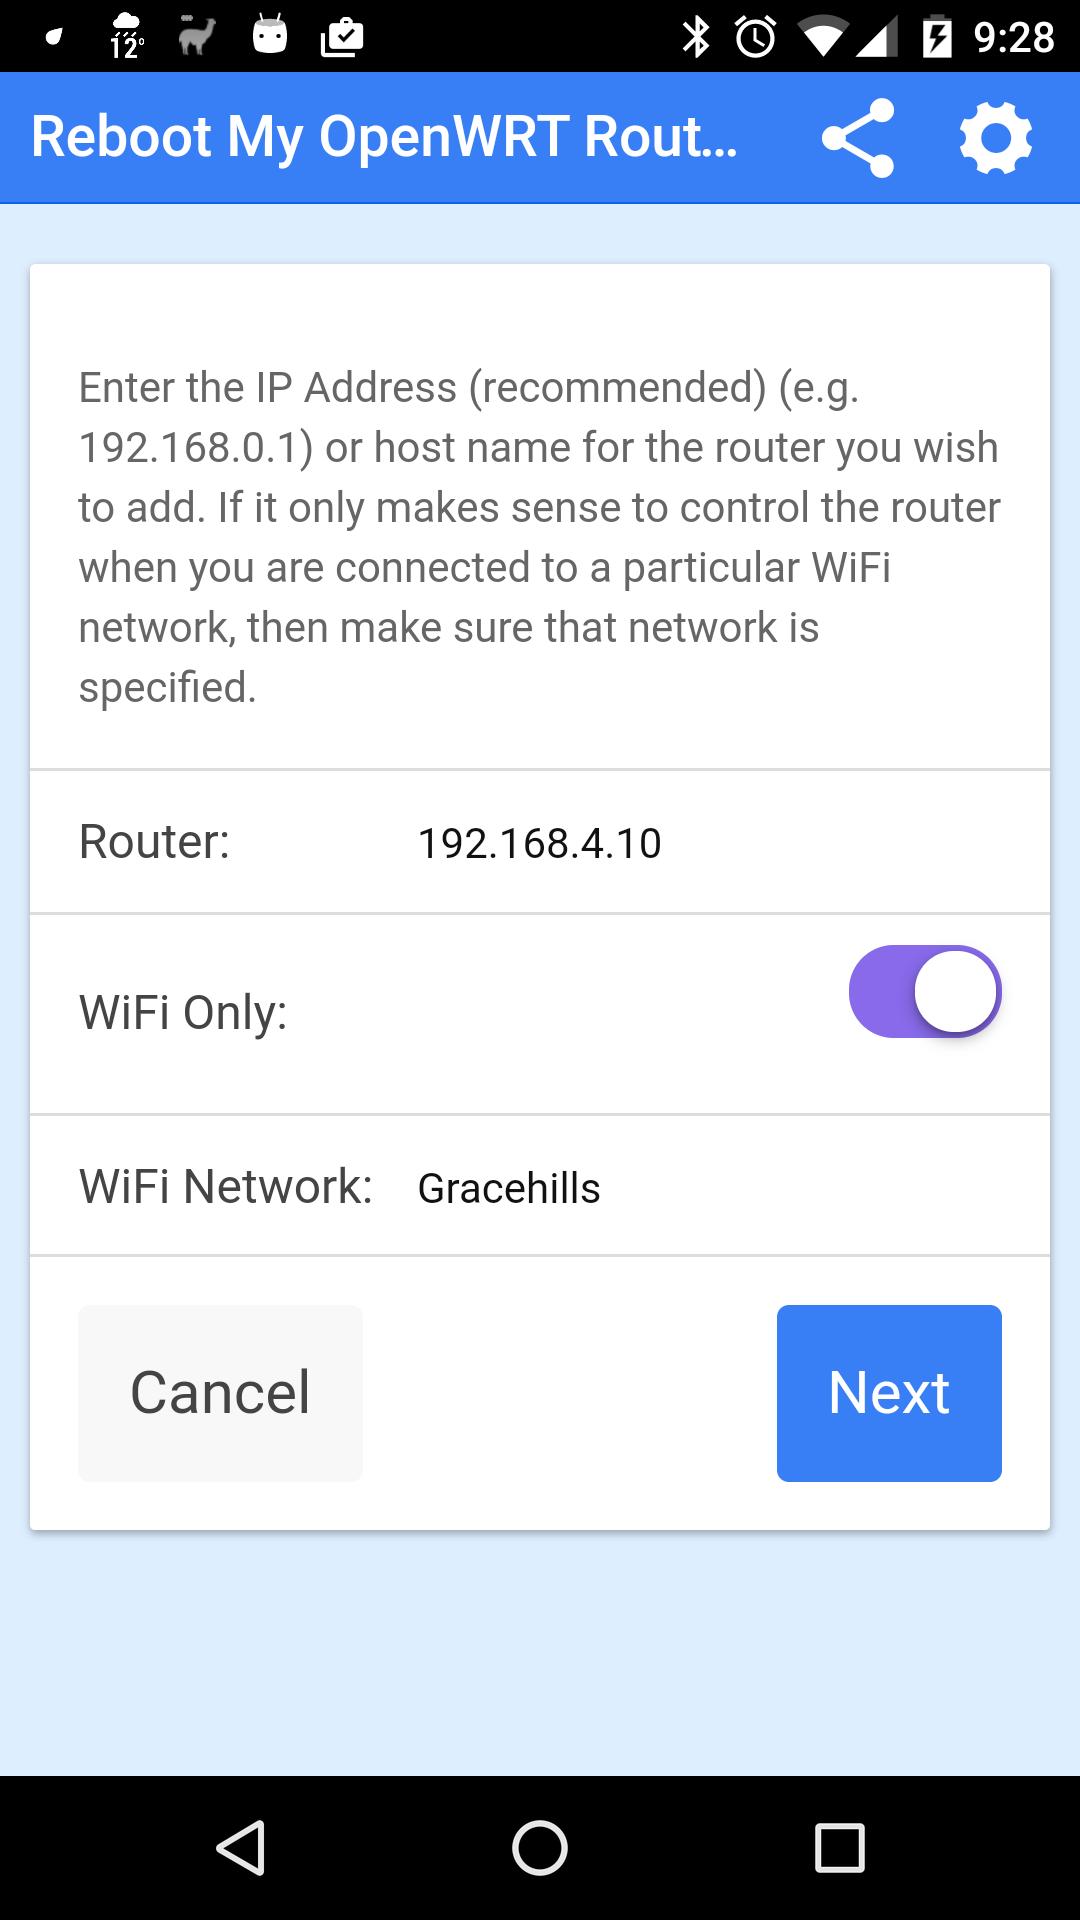 Reboot My OpenWRT Router for Android - APK Download